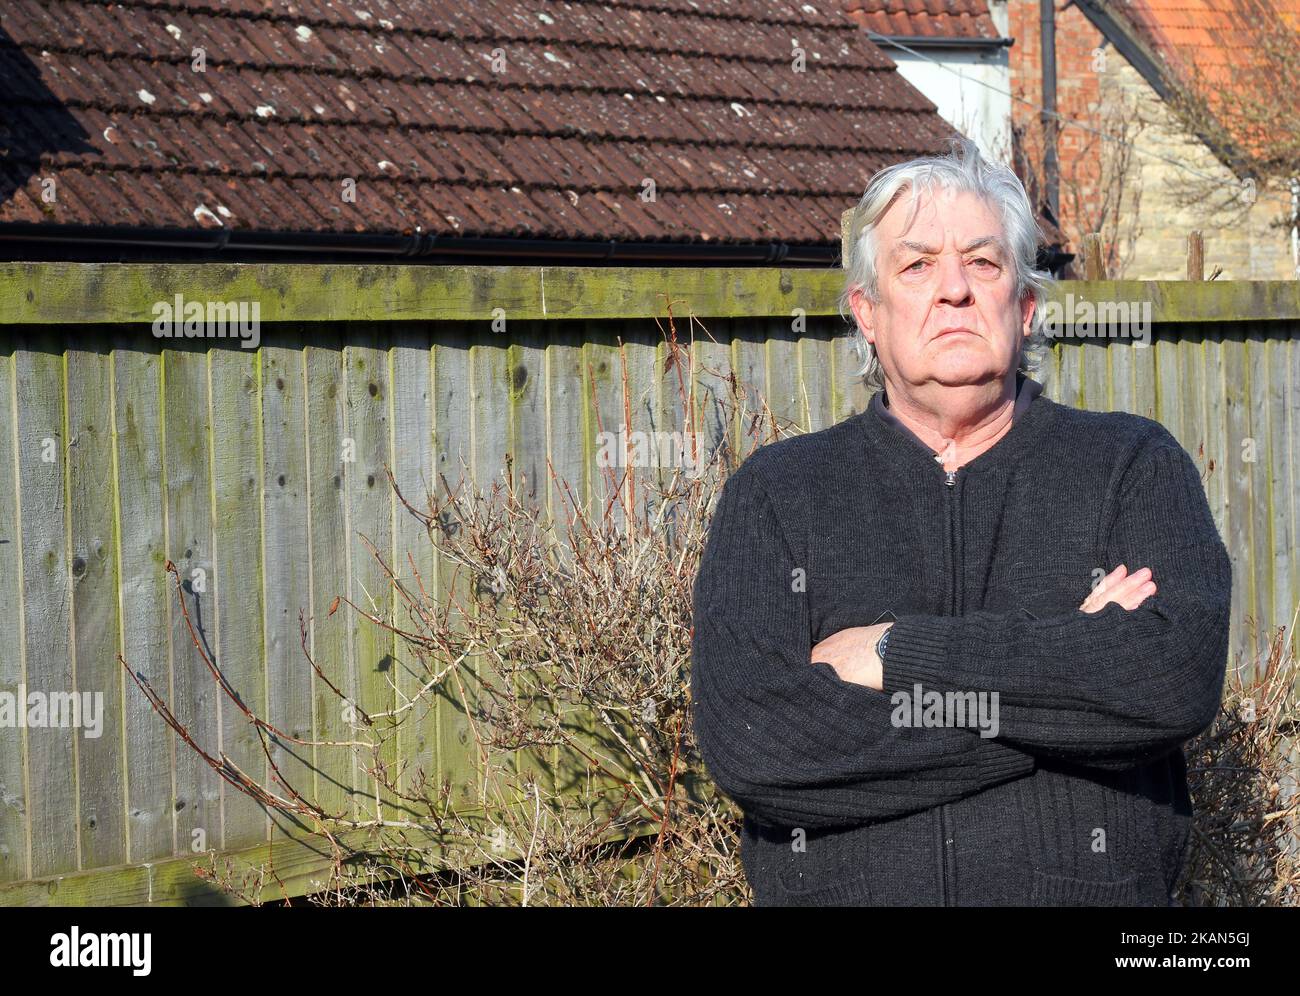 Elderly or senior man looking very smug towards the camera. Defiant and resolute. Stock Photo